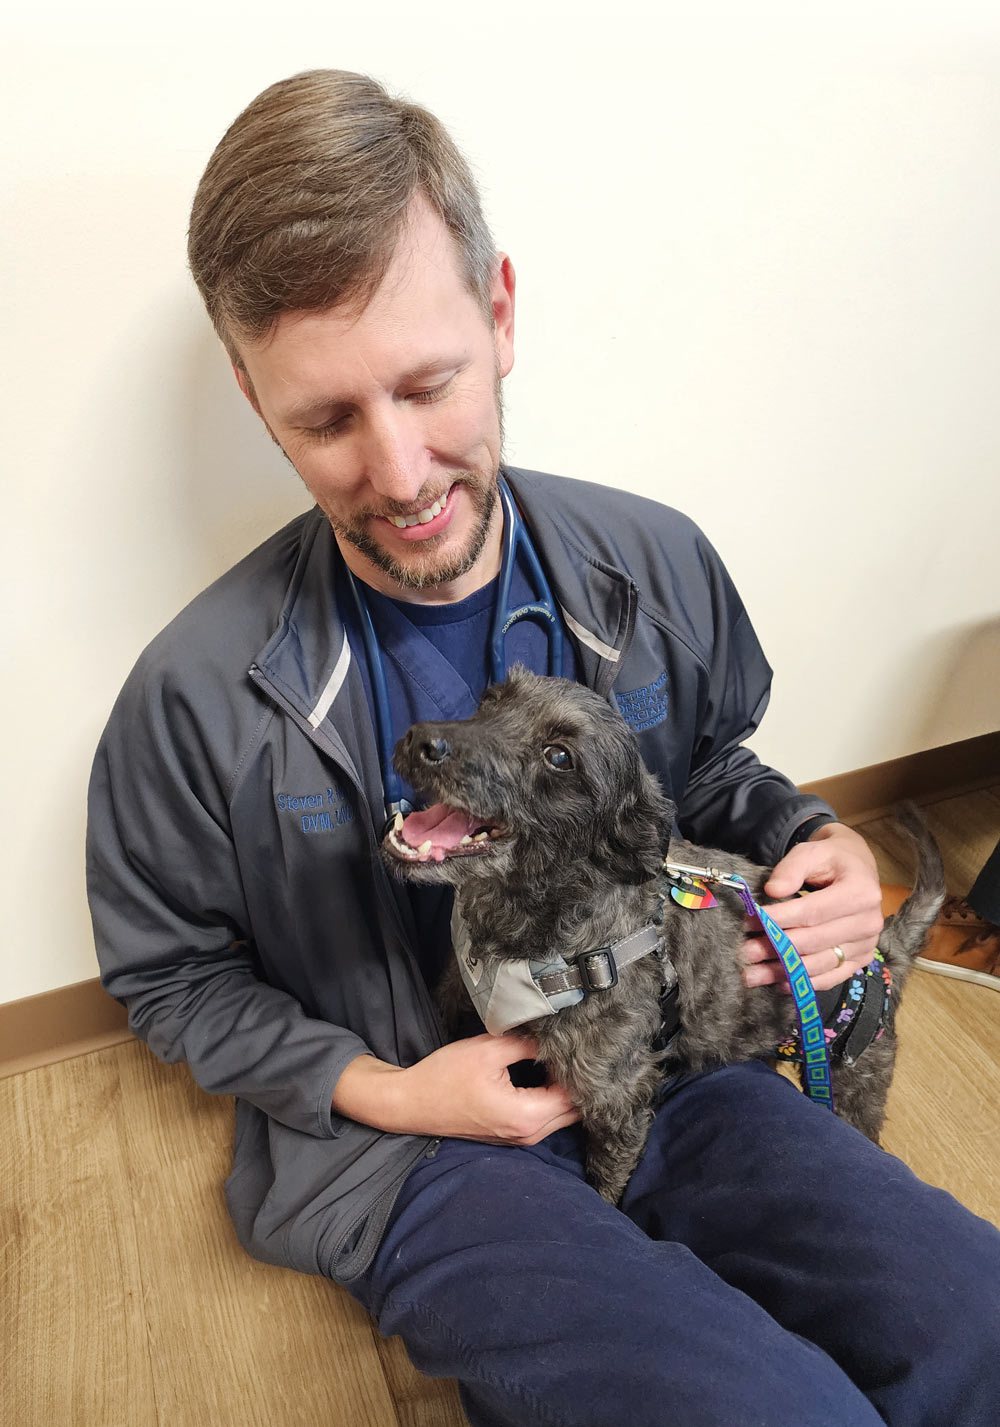 Dr. Steven Honzelka with a dog in his lap